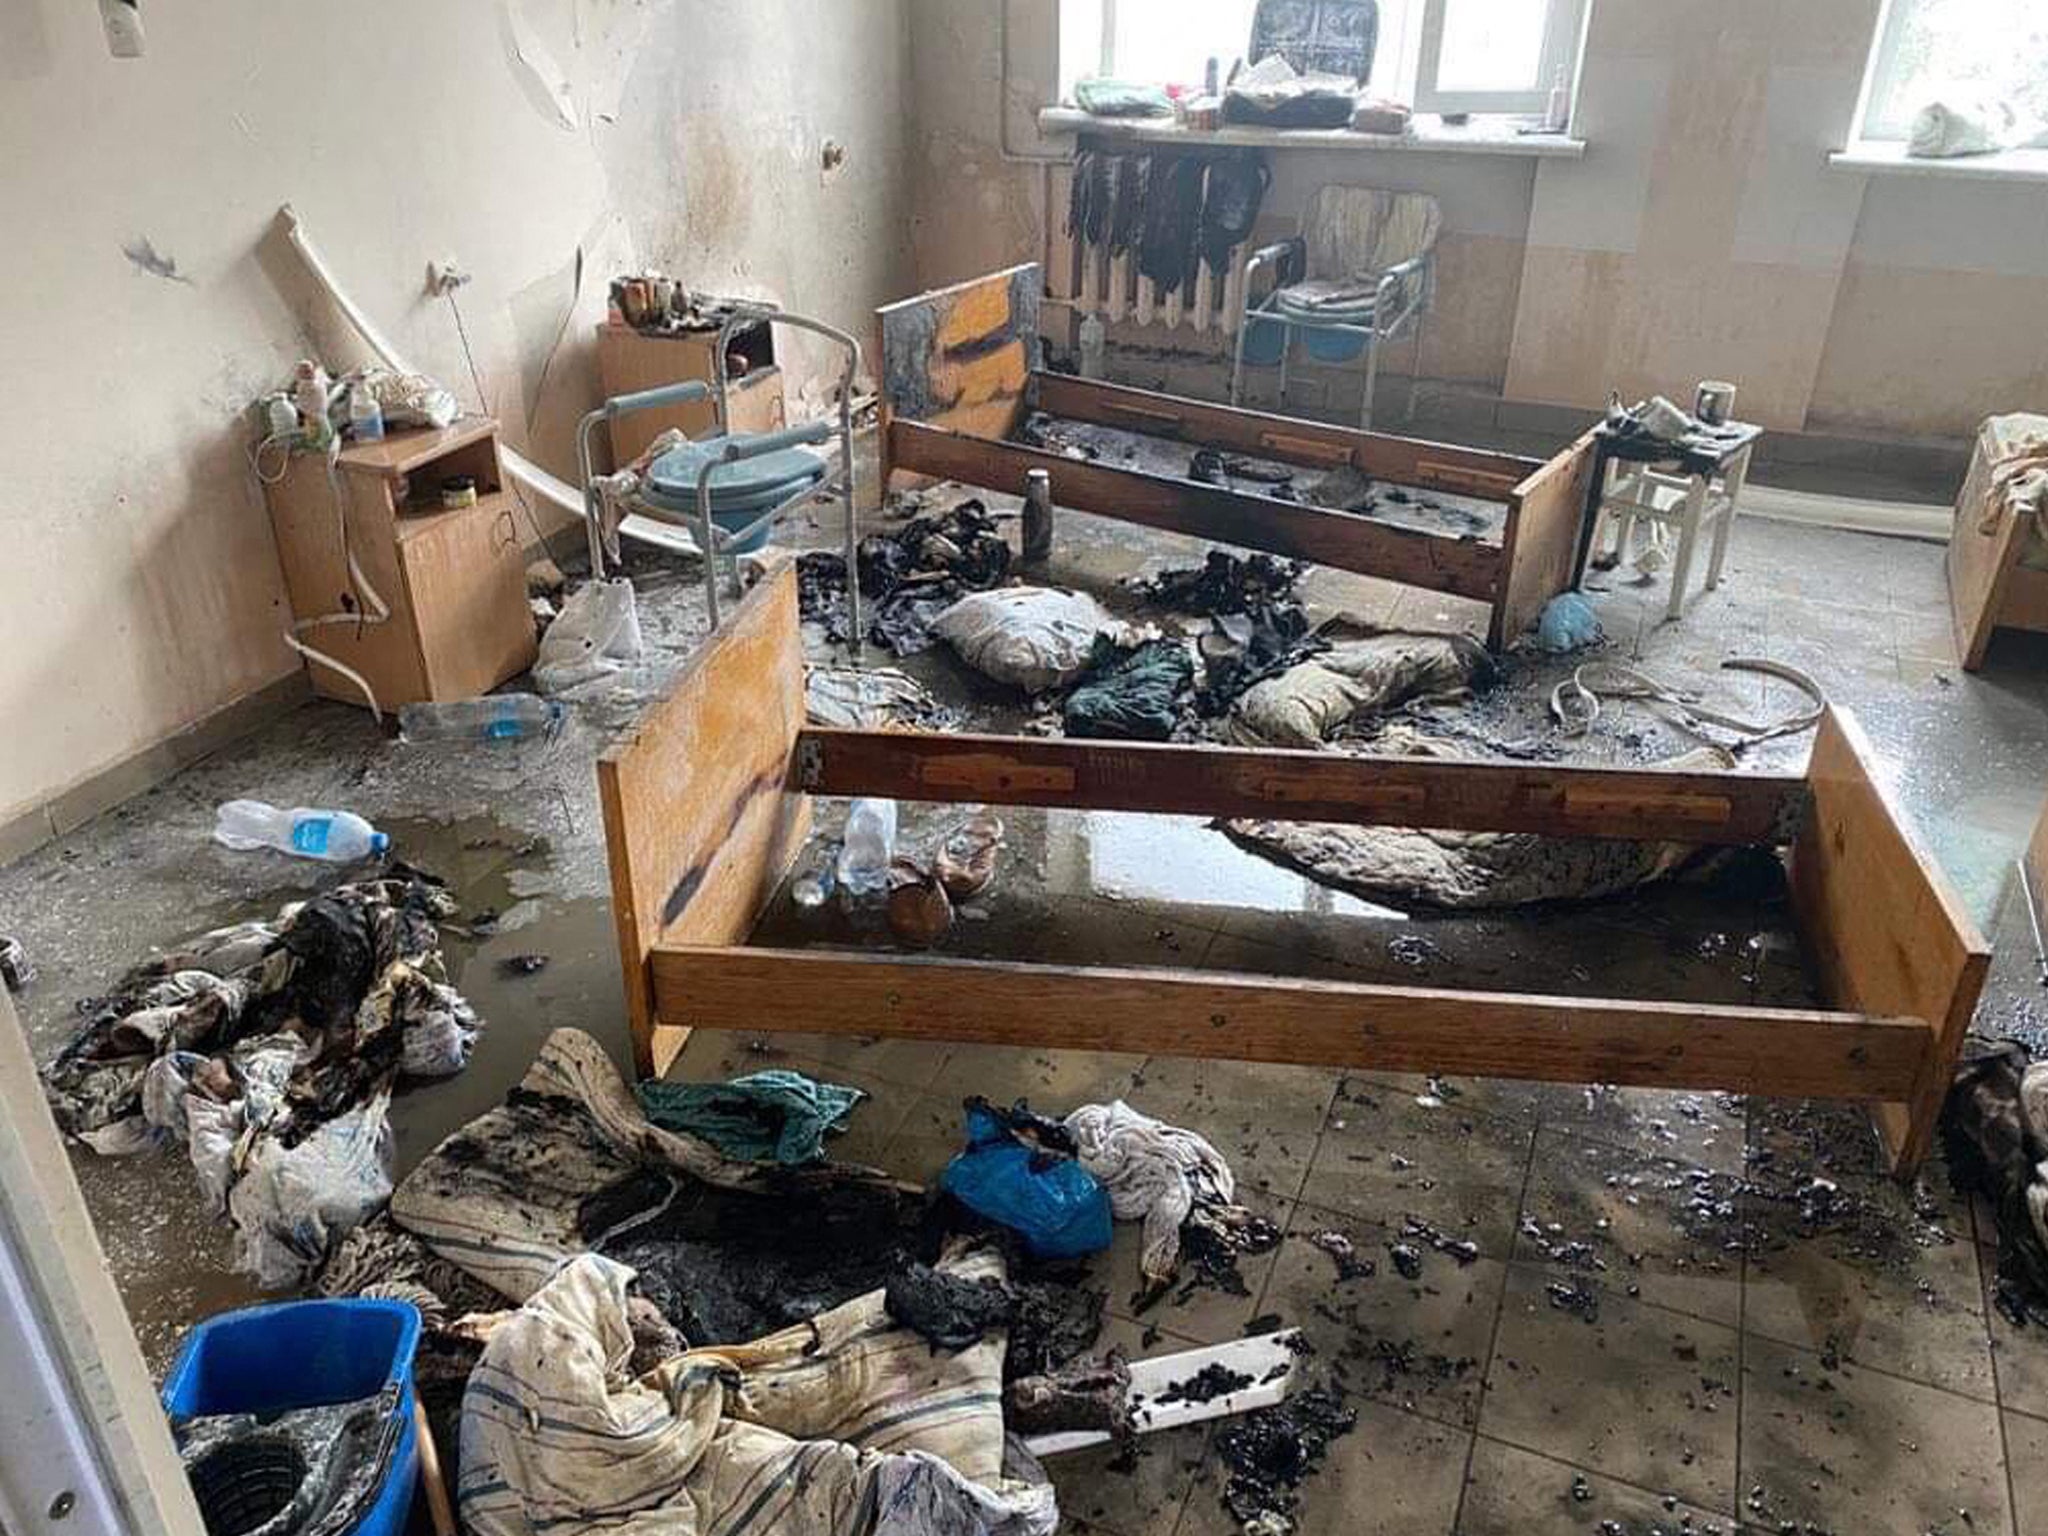 The aftermath of the fire that raged through a hospital ward